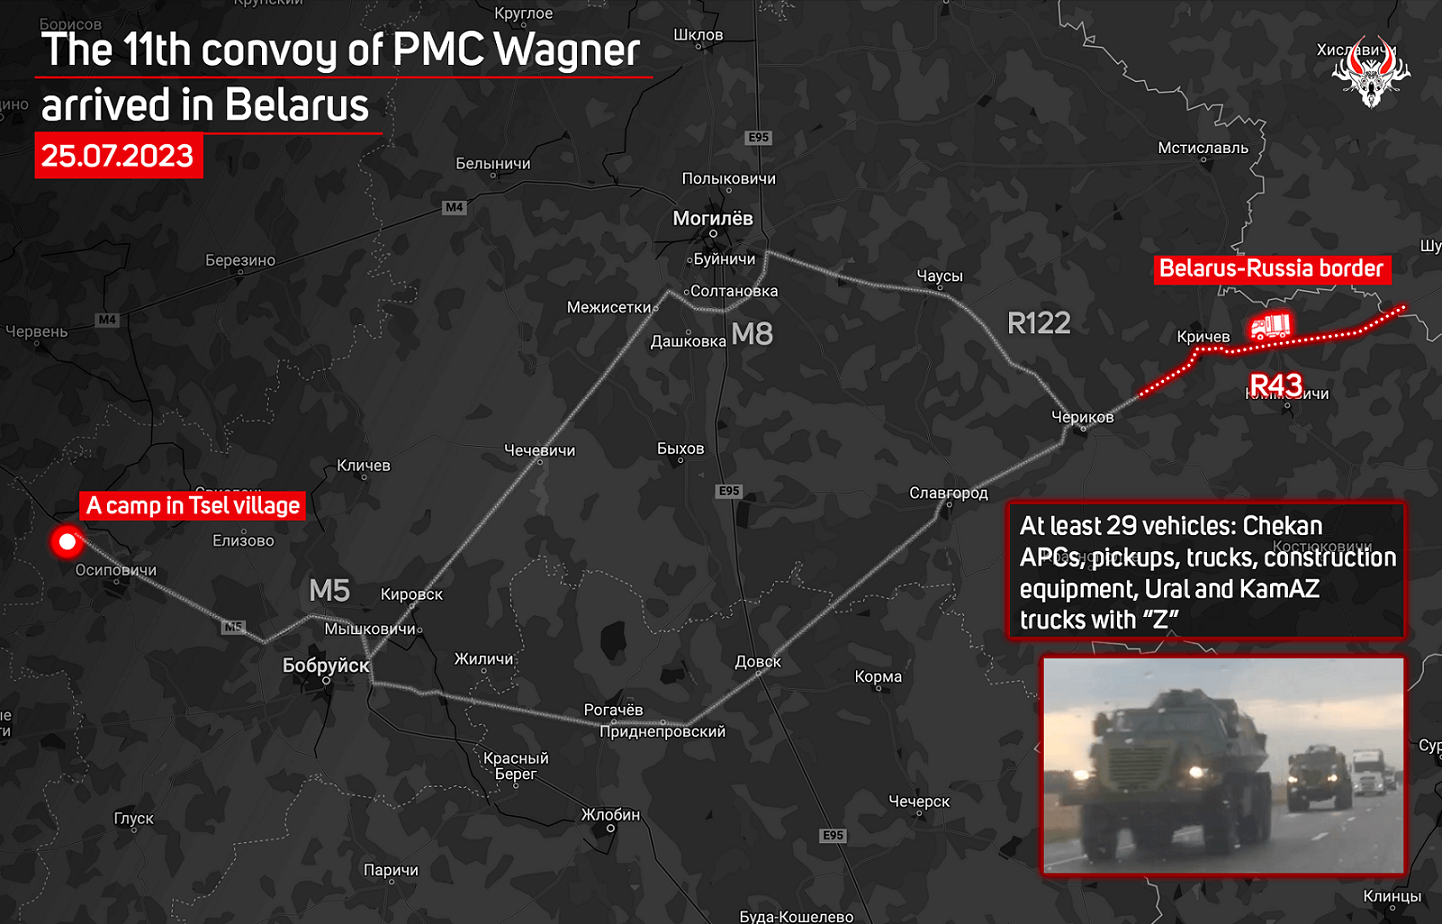 The 11th convoy of PMC Wagner arrived in Belarus